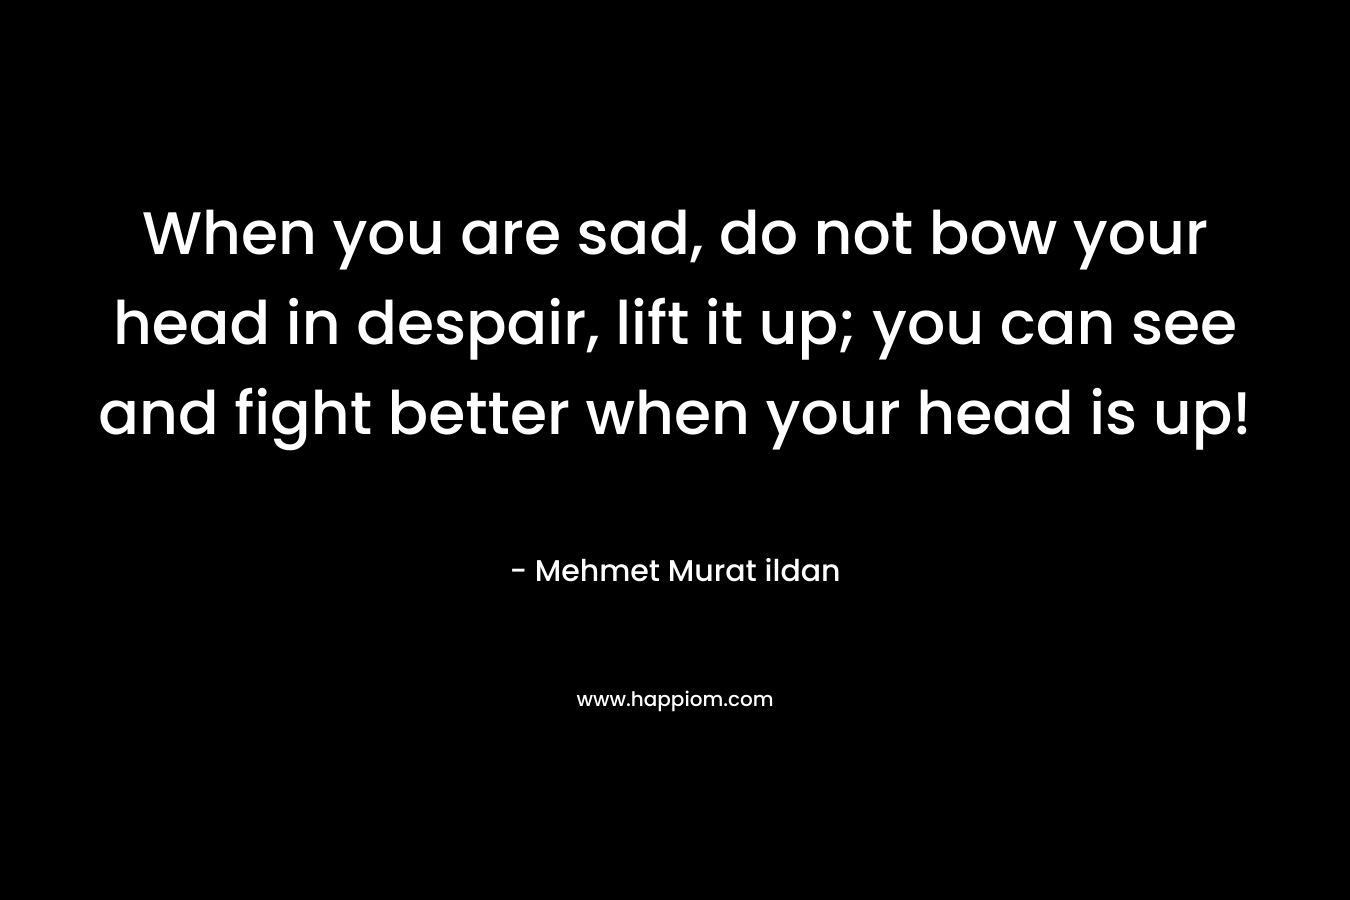 When you are sad, do not bow your head in despair, lift it up; you can see and fight better when your head is up! – Mehmet Murat ildan